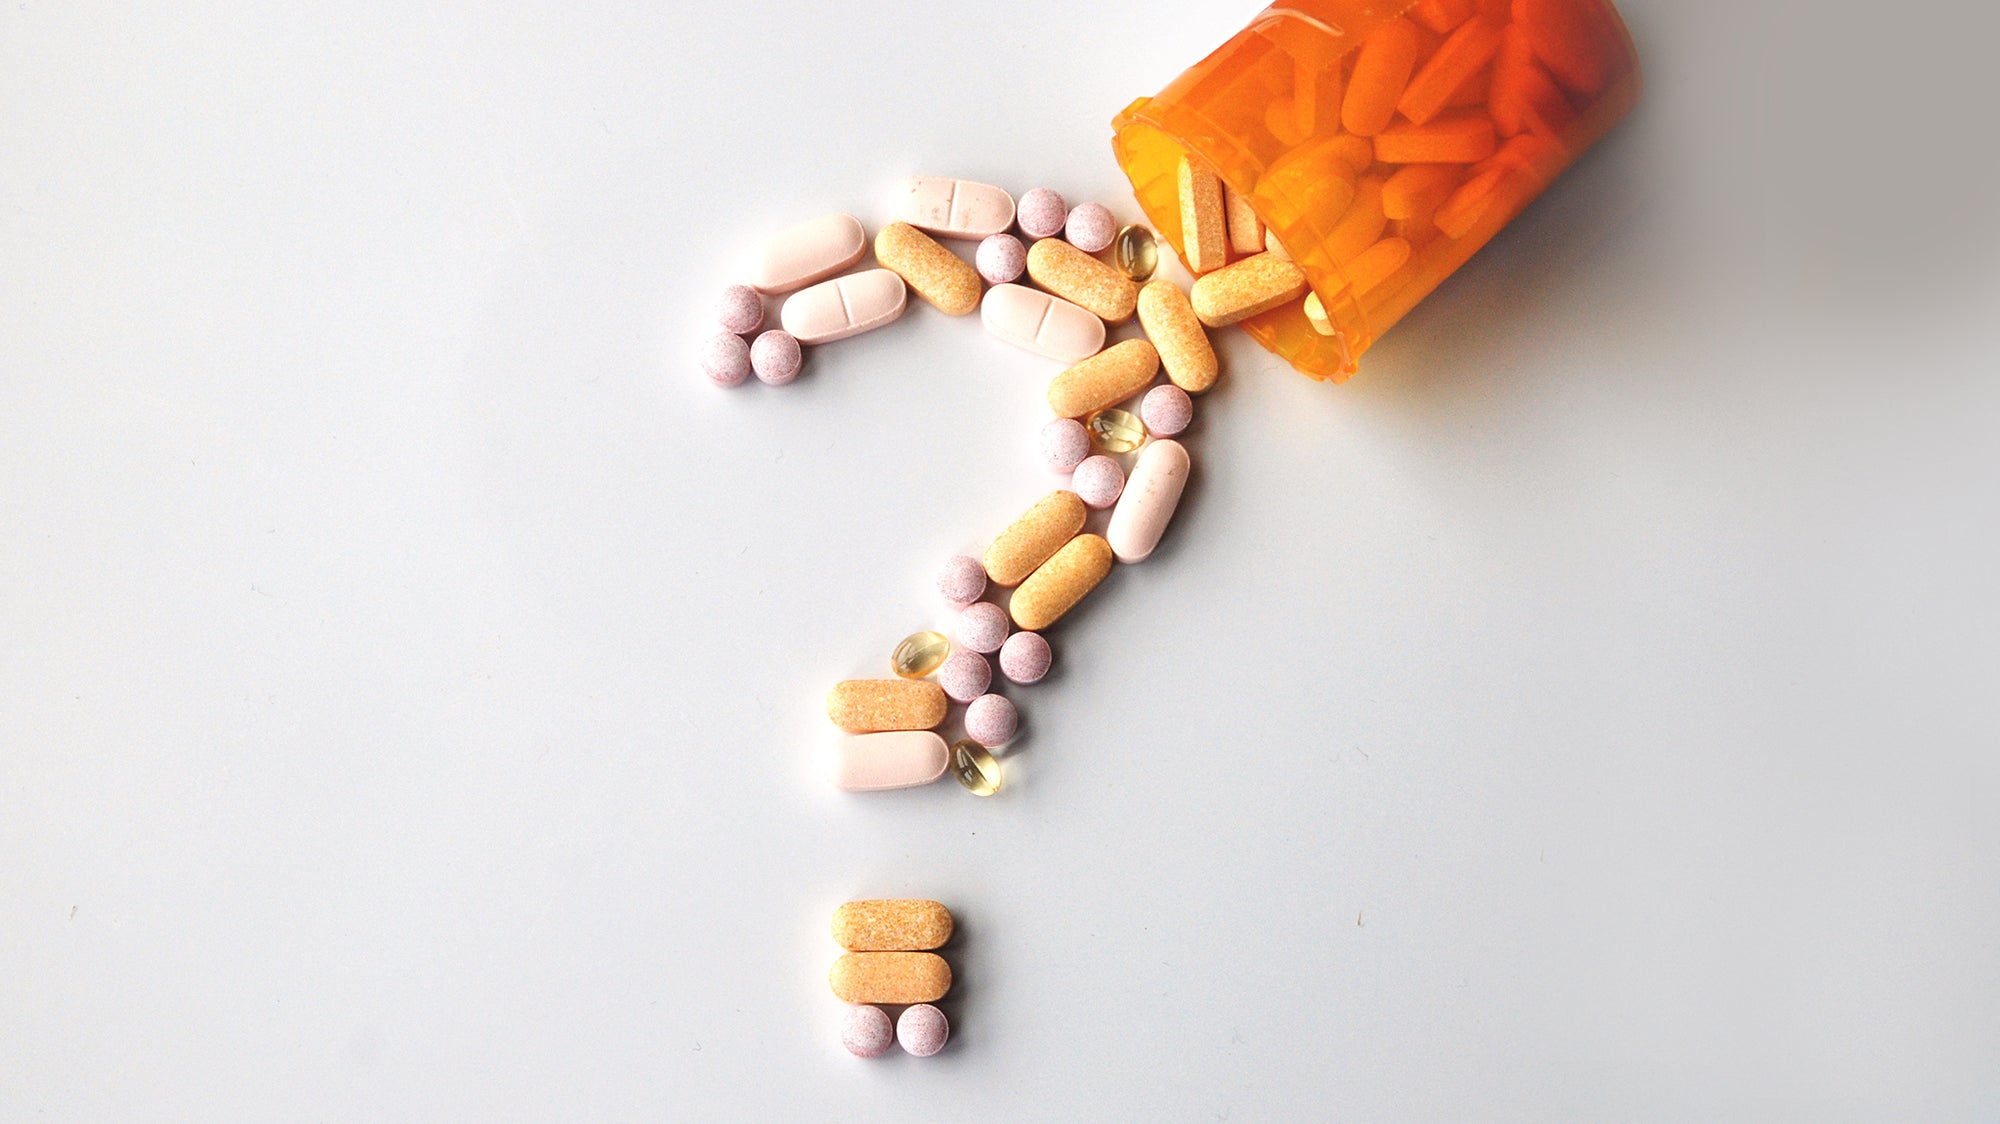 Facts you should know before taking prescription painkillers